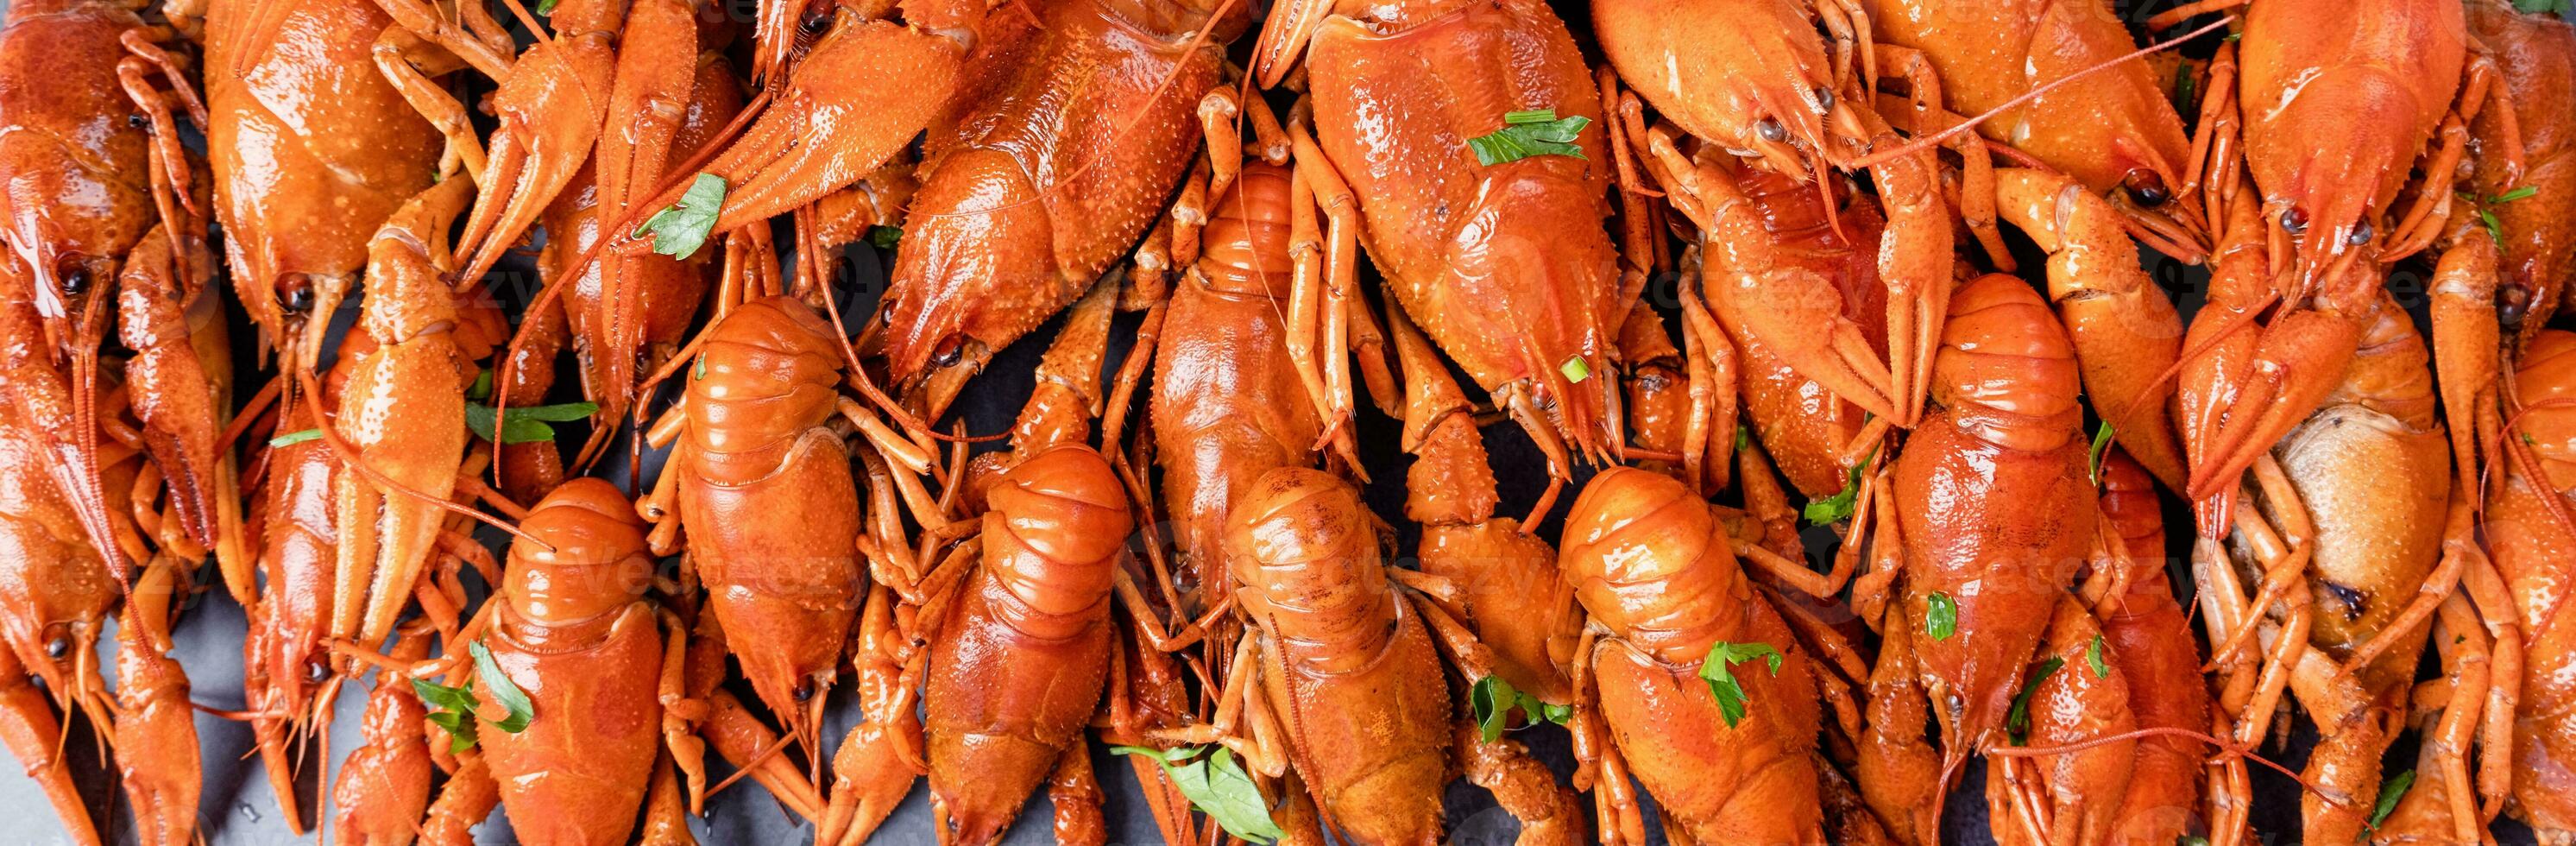 top view of cooked crawfish with lemons and spices photo